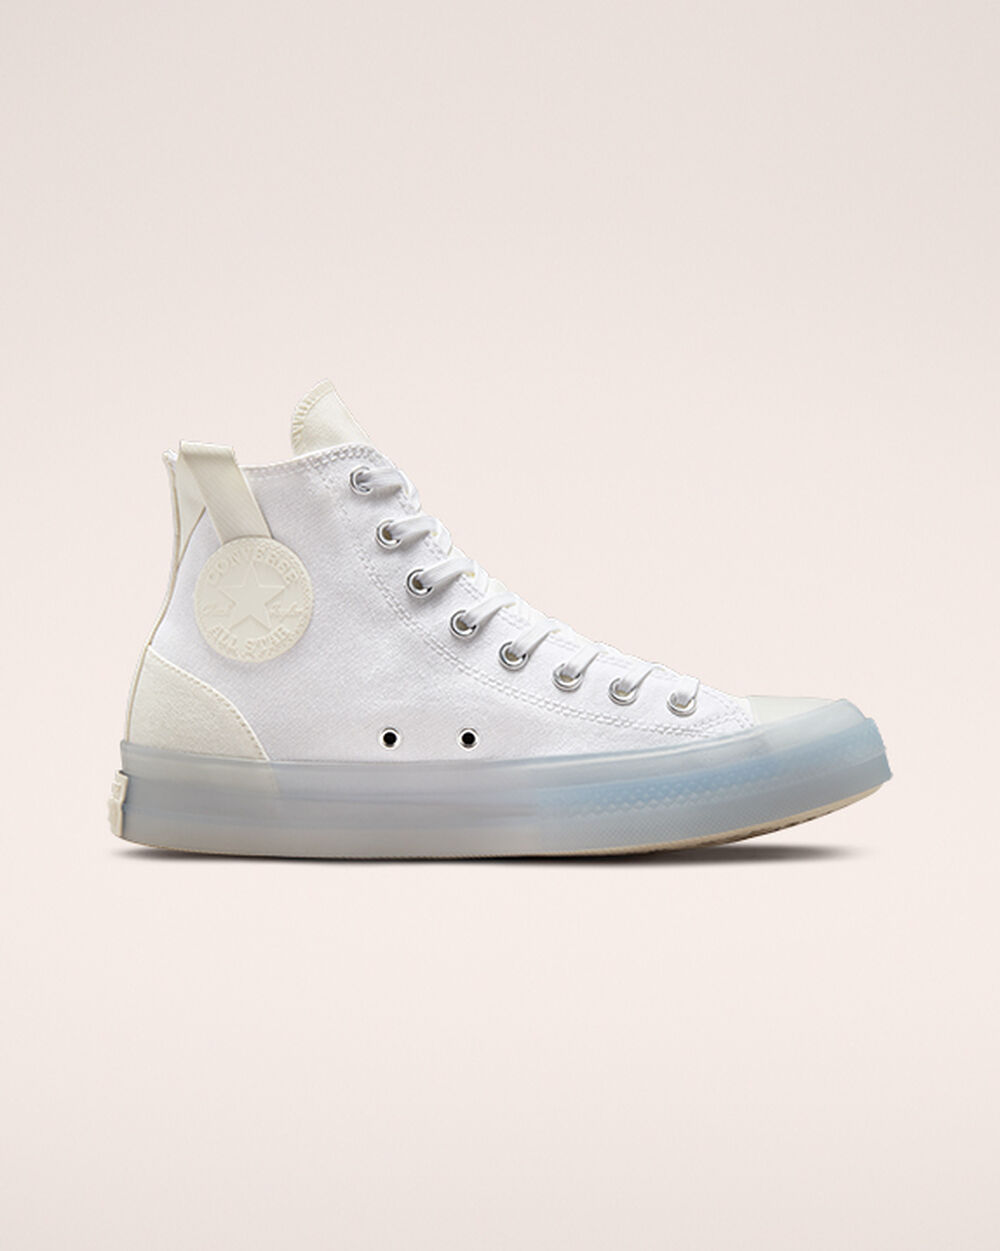 Tenis Converse Chuck Taylor All Star CX Mujer Blancos | Mexico-647366